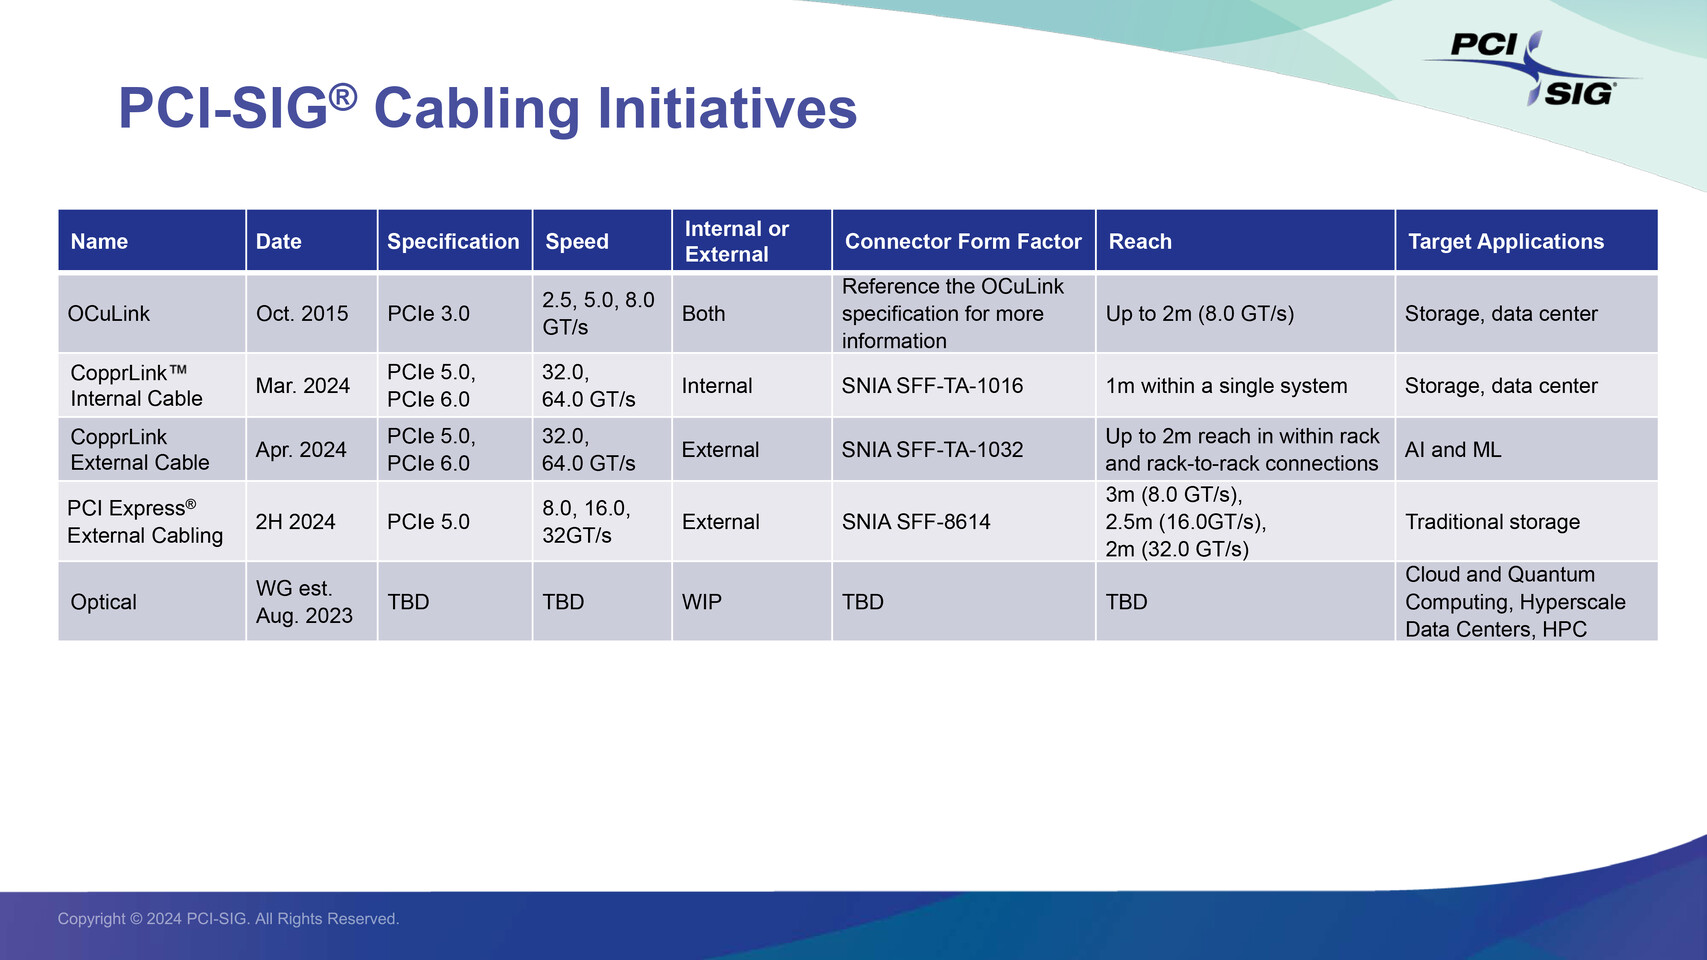 PCI-SIG has released specifications for CopprLink cables for PCIe 5.0 and 6.0 technology.